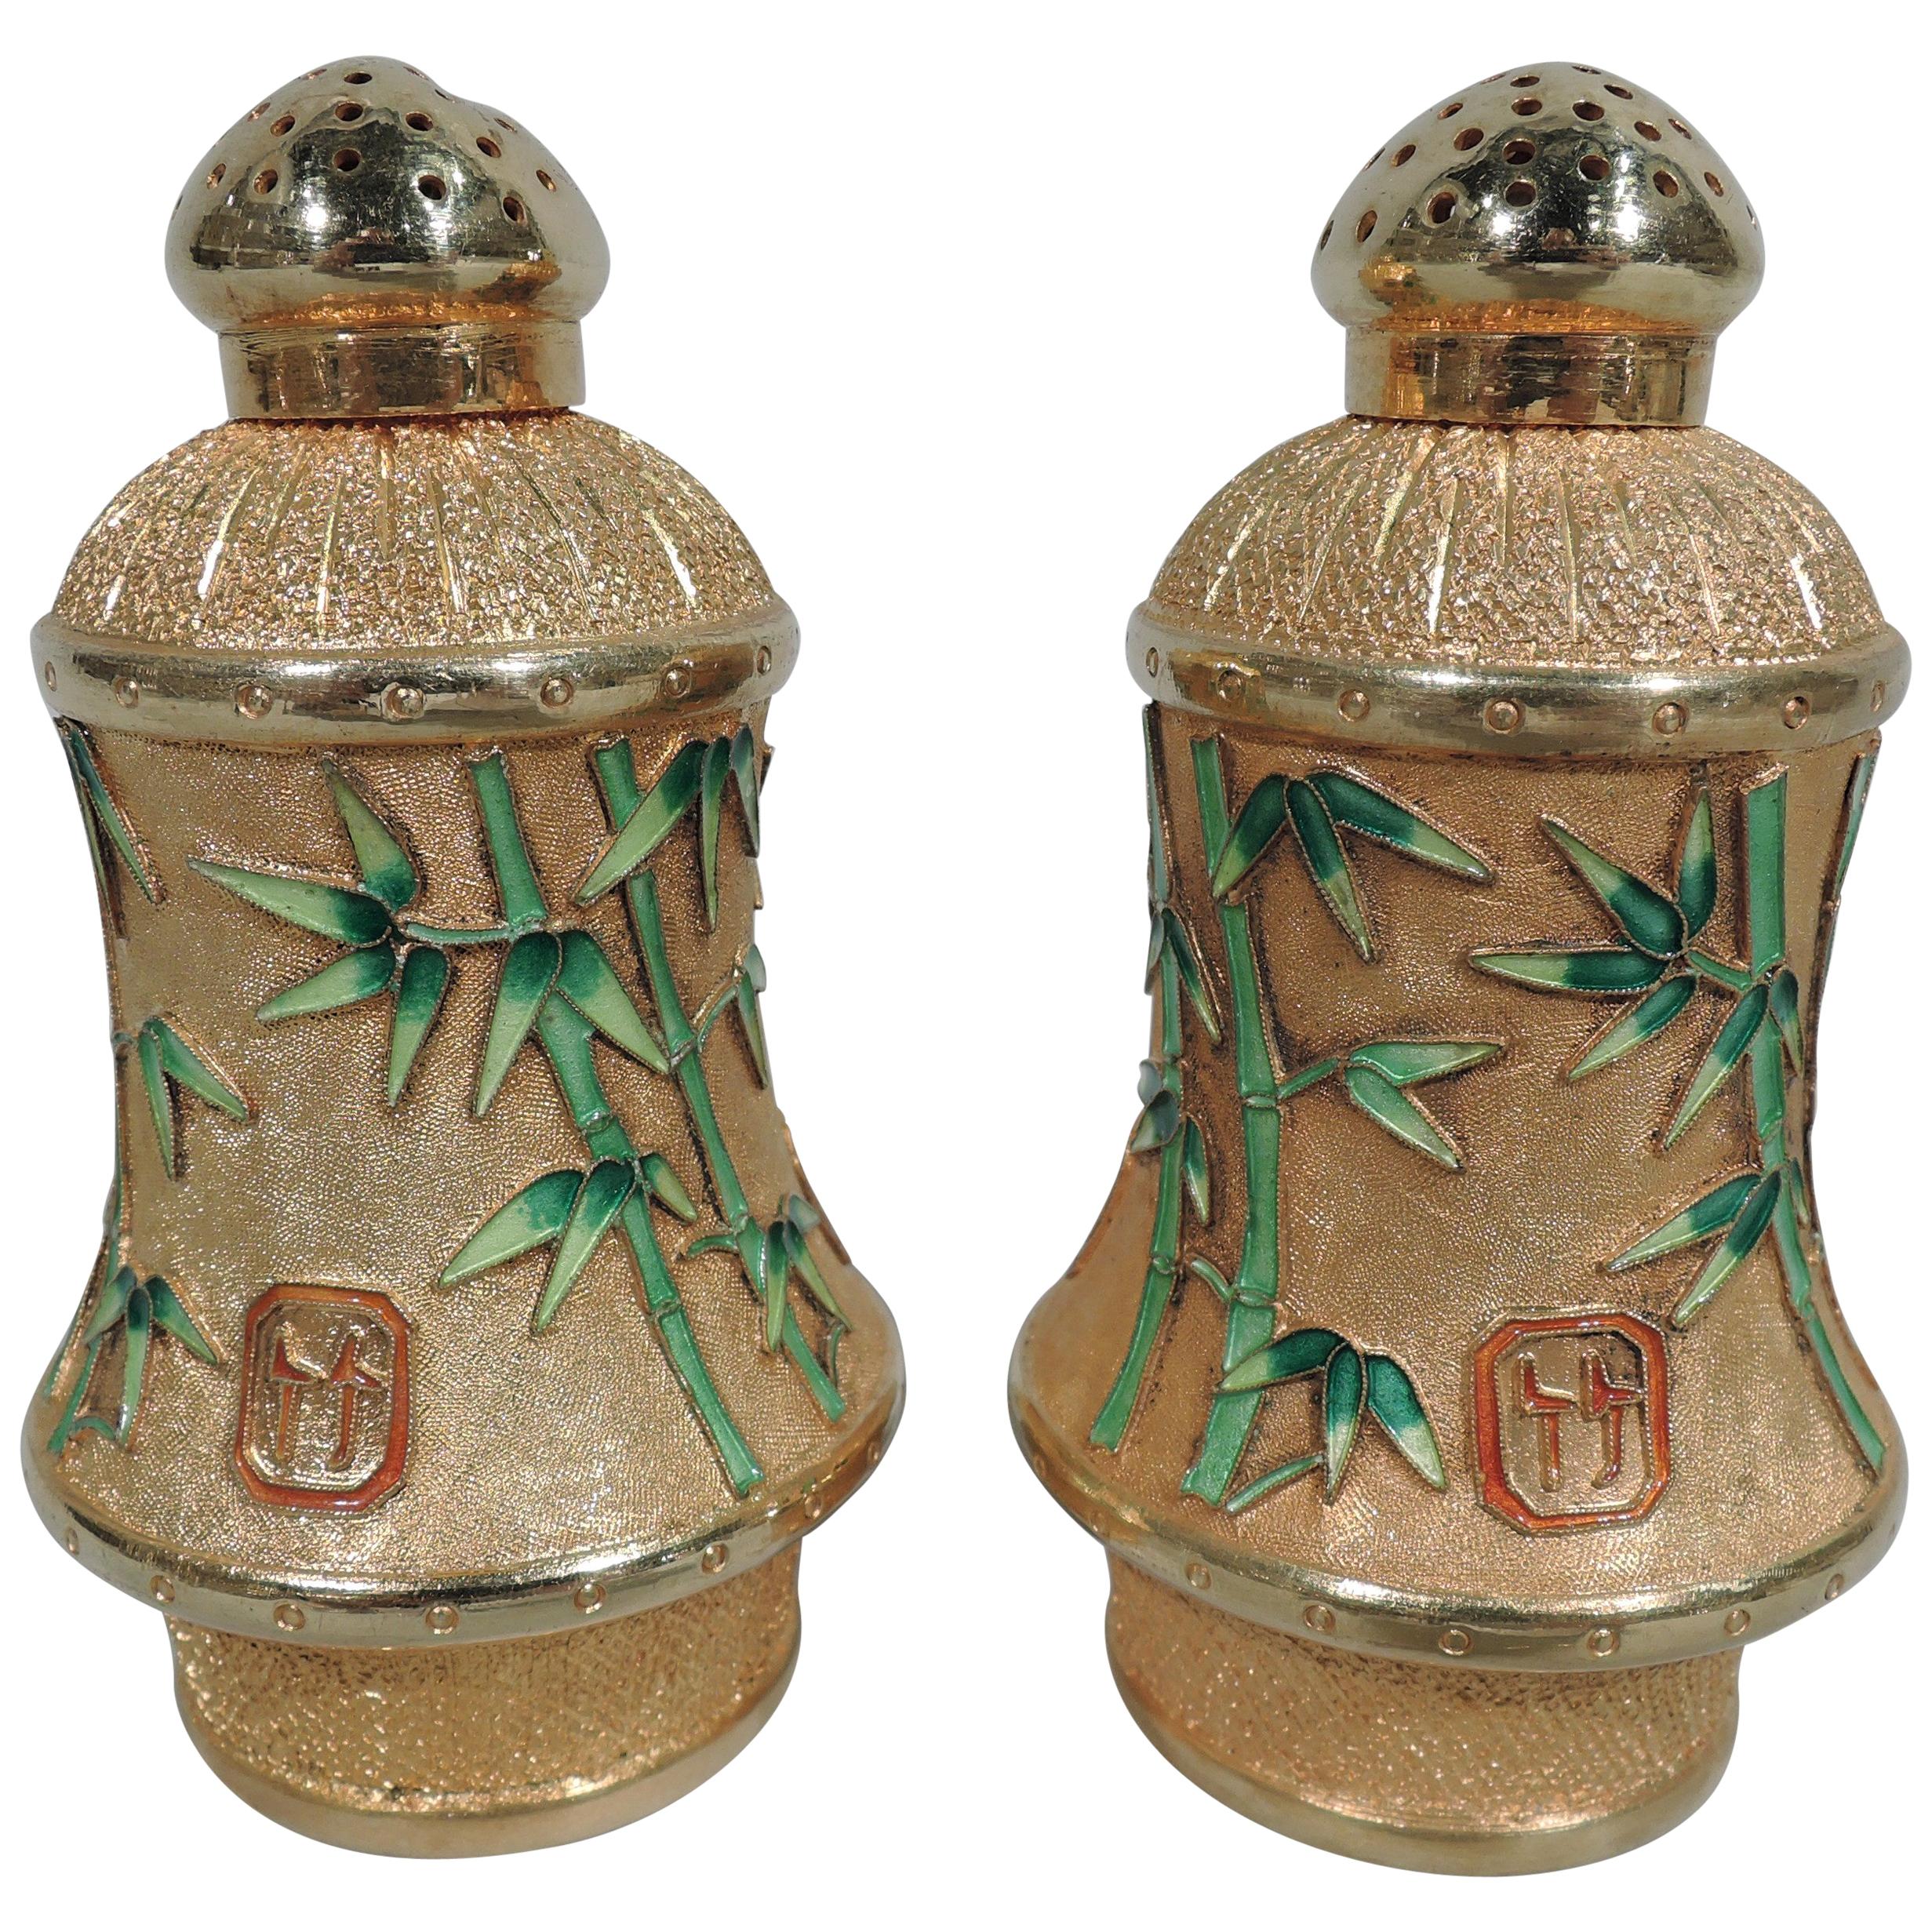 Pair of Chinese Silver Gilt and Enamel Bamboo Salt and Pepper Shakers